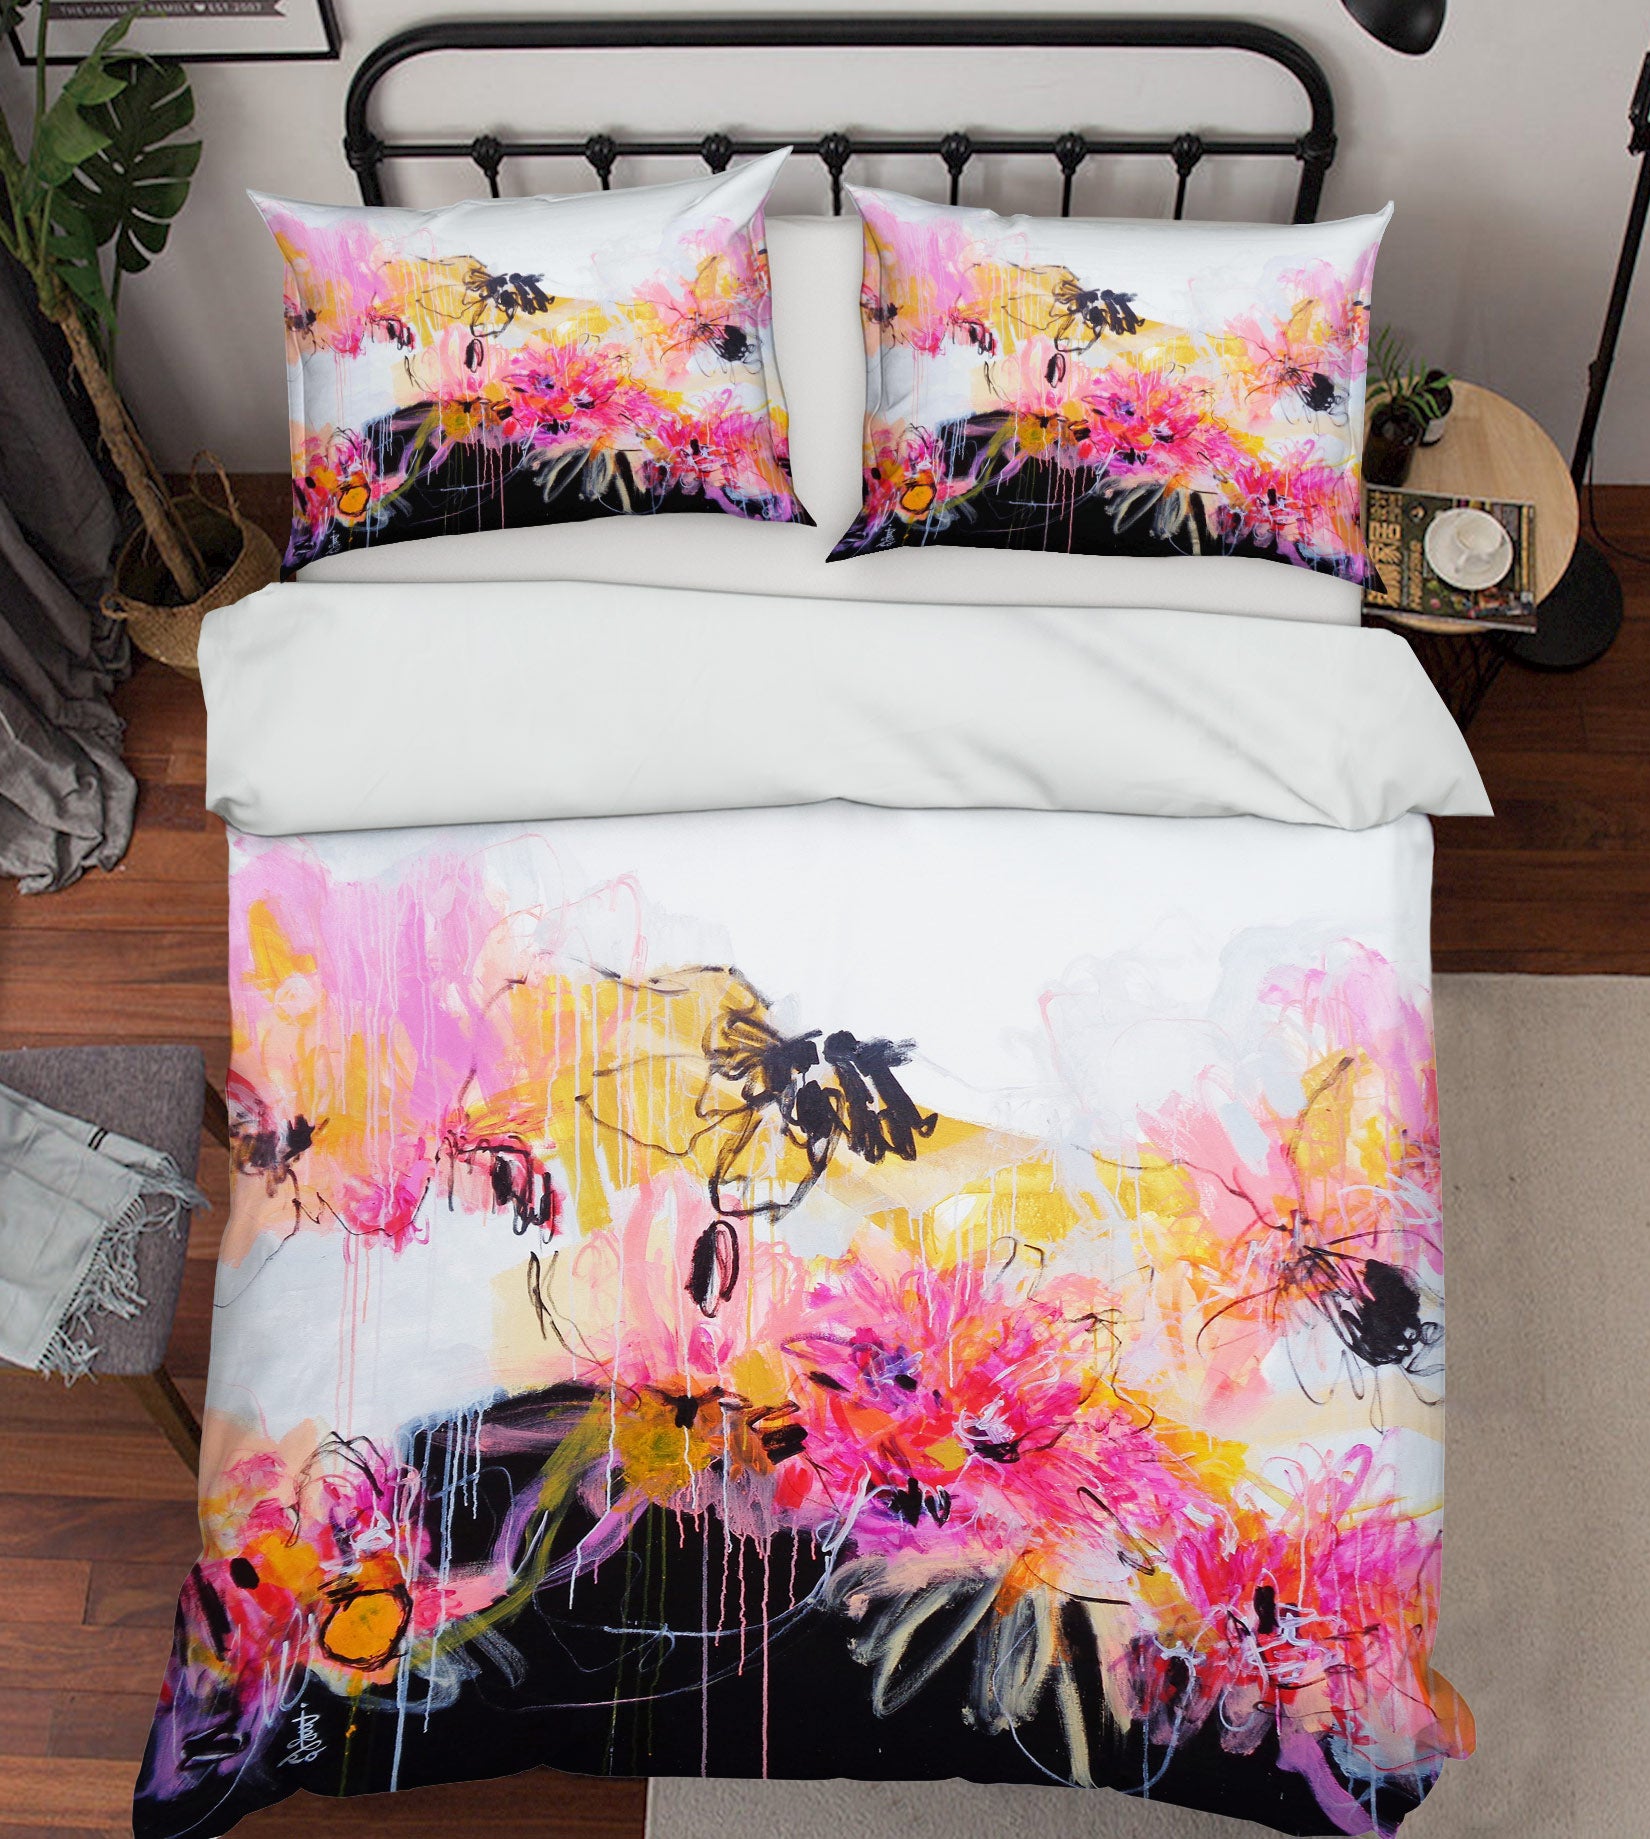 3D Pink Watercolor Flowers 1145 Misako Chida Bedding Bed Pillowcases Quilt Cover Duvet Cover